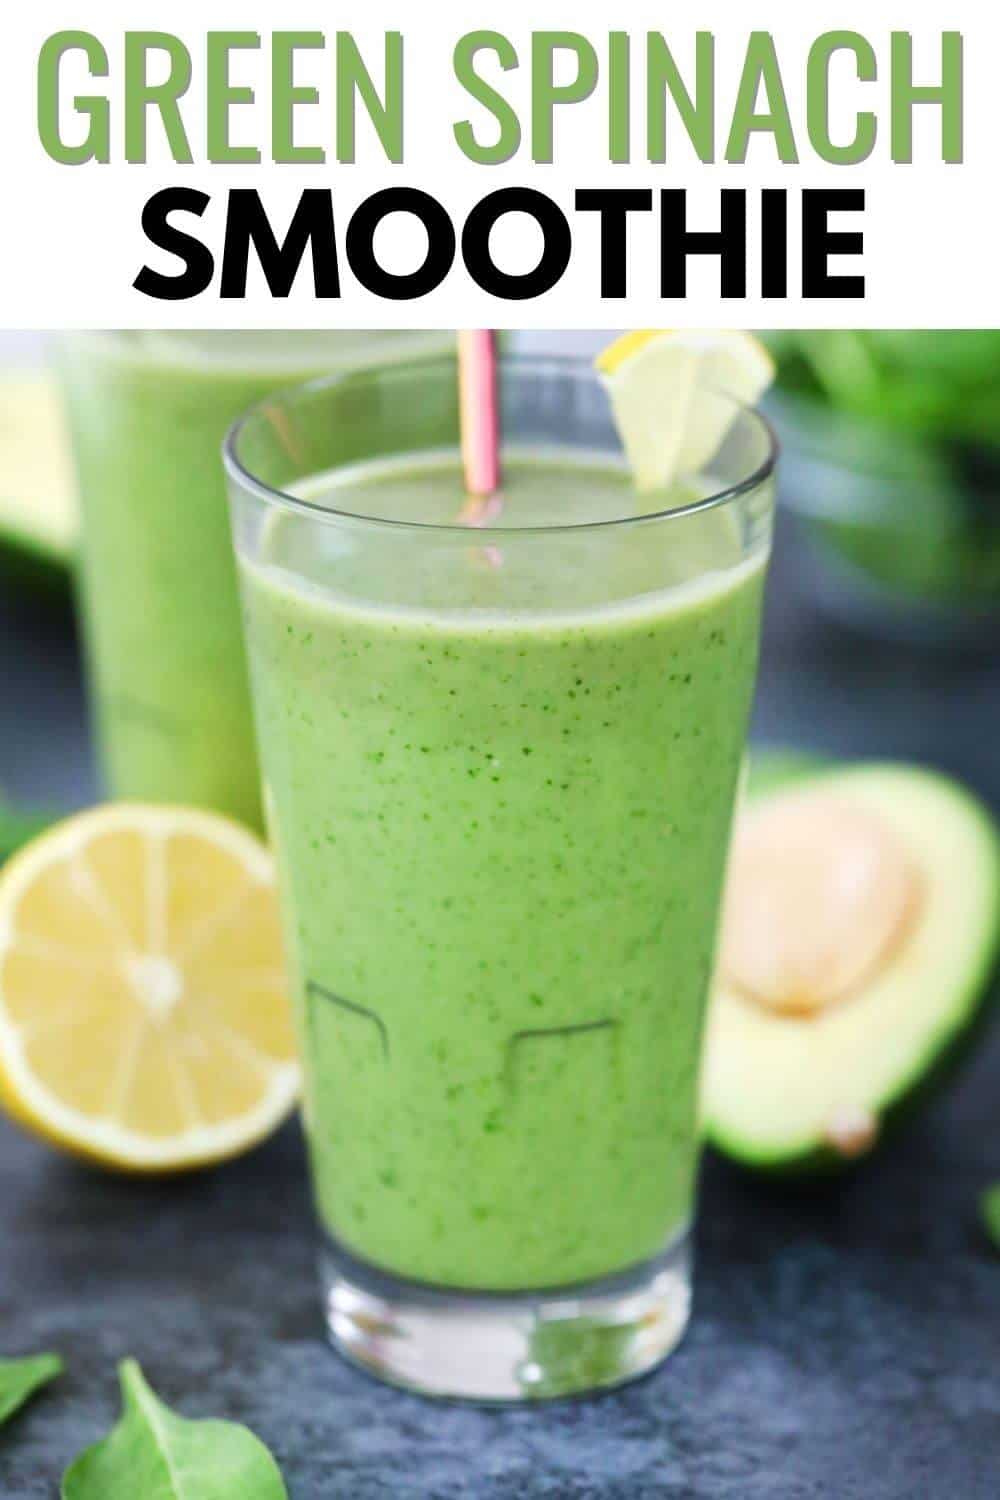 Green avocado spinach smoothies with title text overlay.